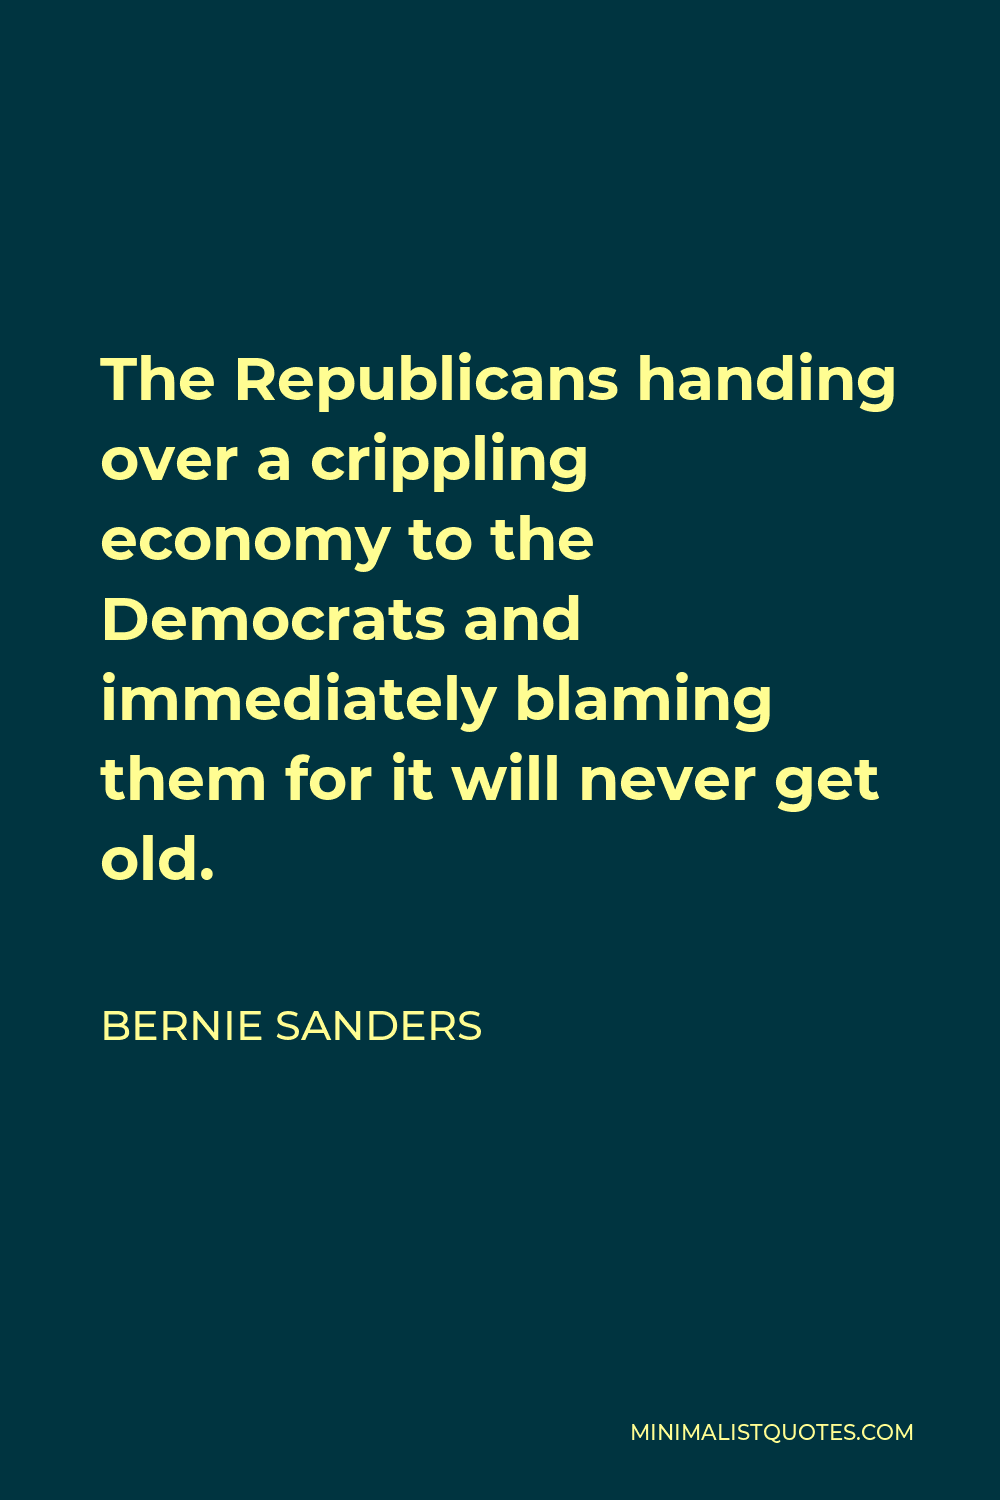 Bernie Sanders Quote - The Republicans handing over a crippling economy to the Democrats and immediately blaming them for it will never get old.